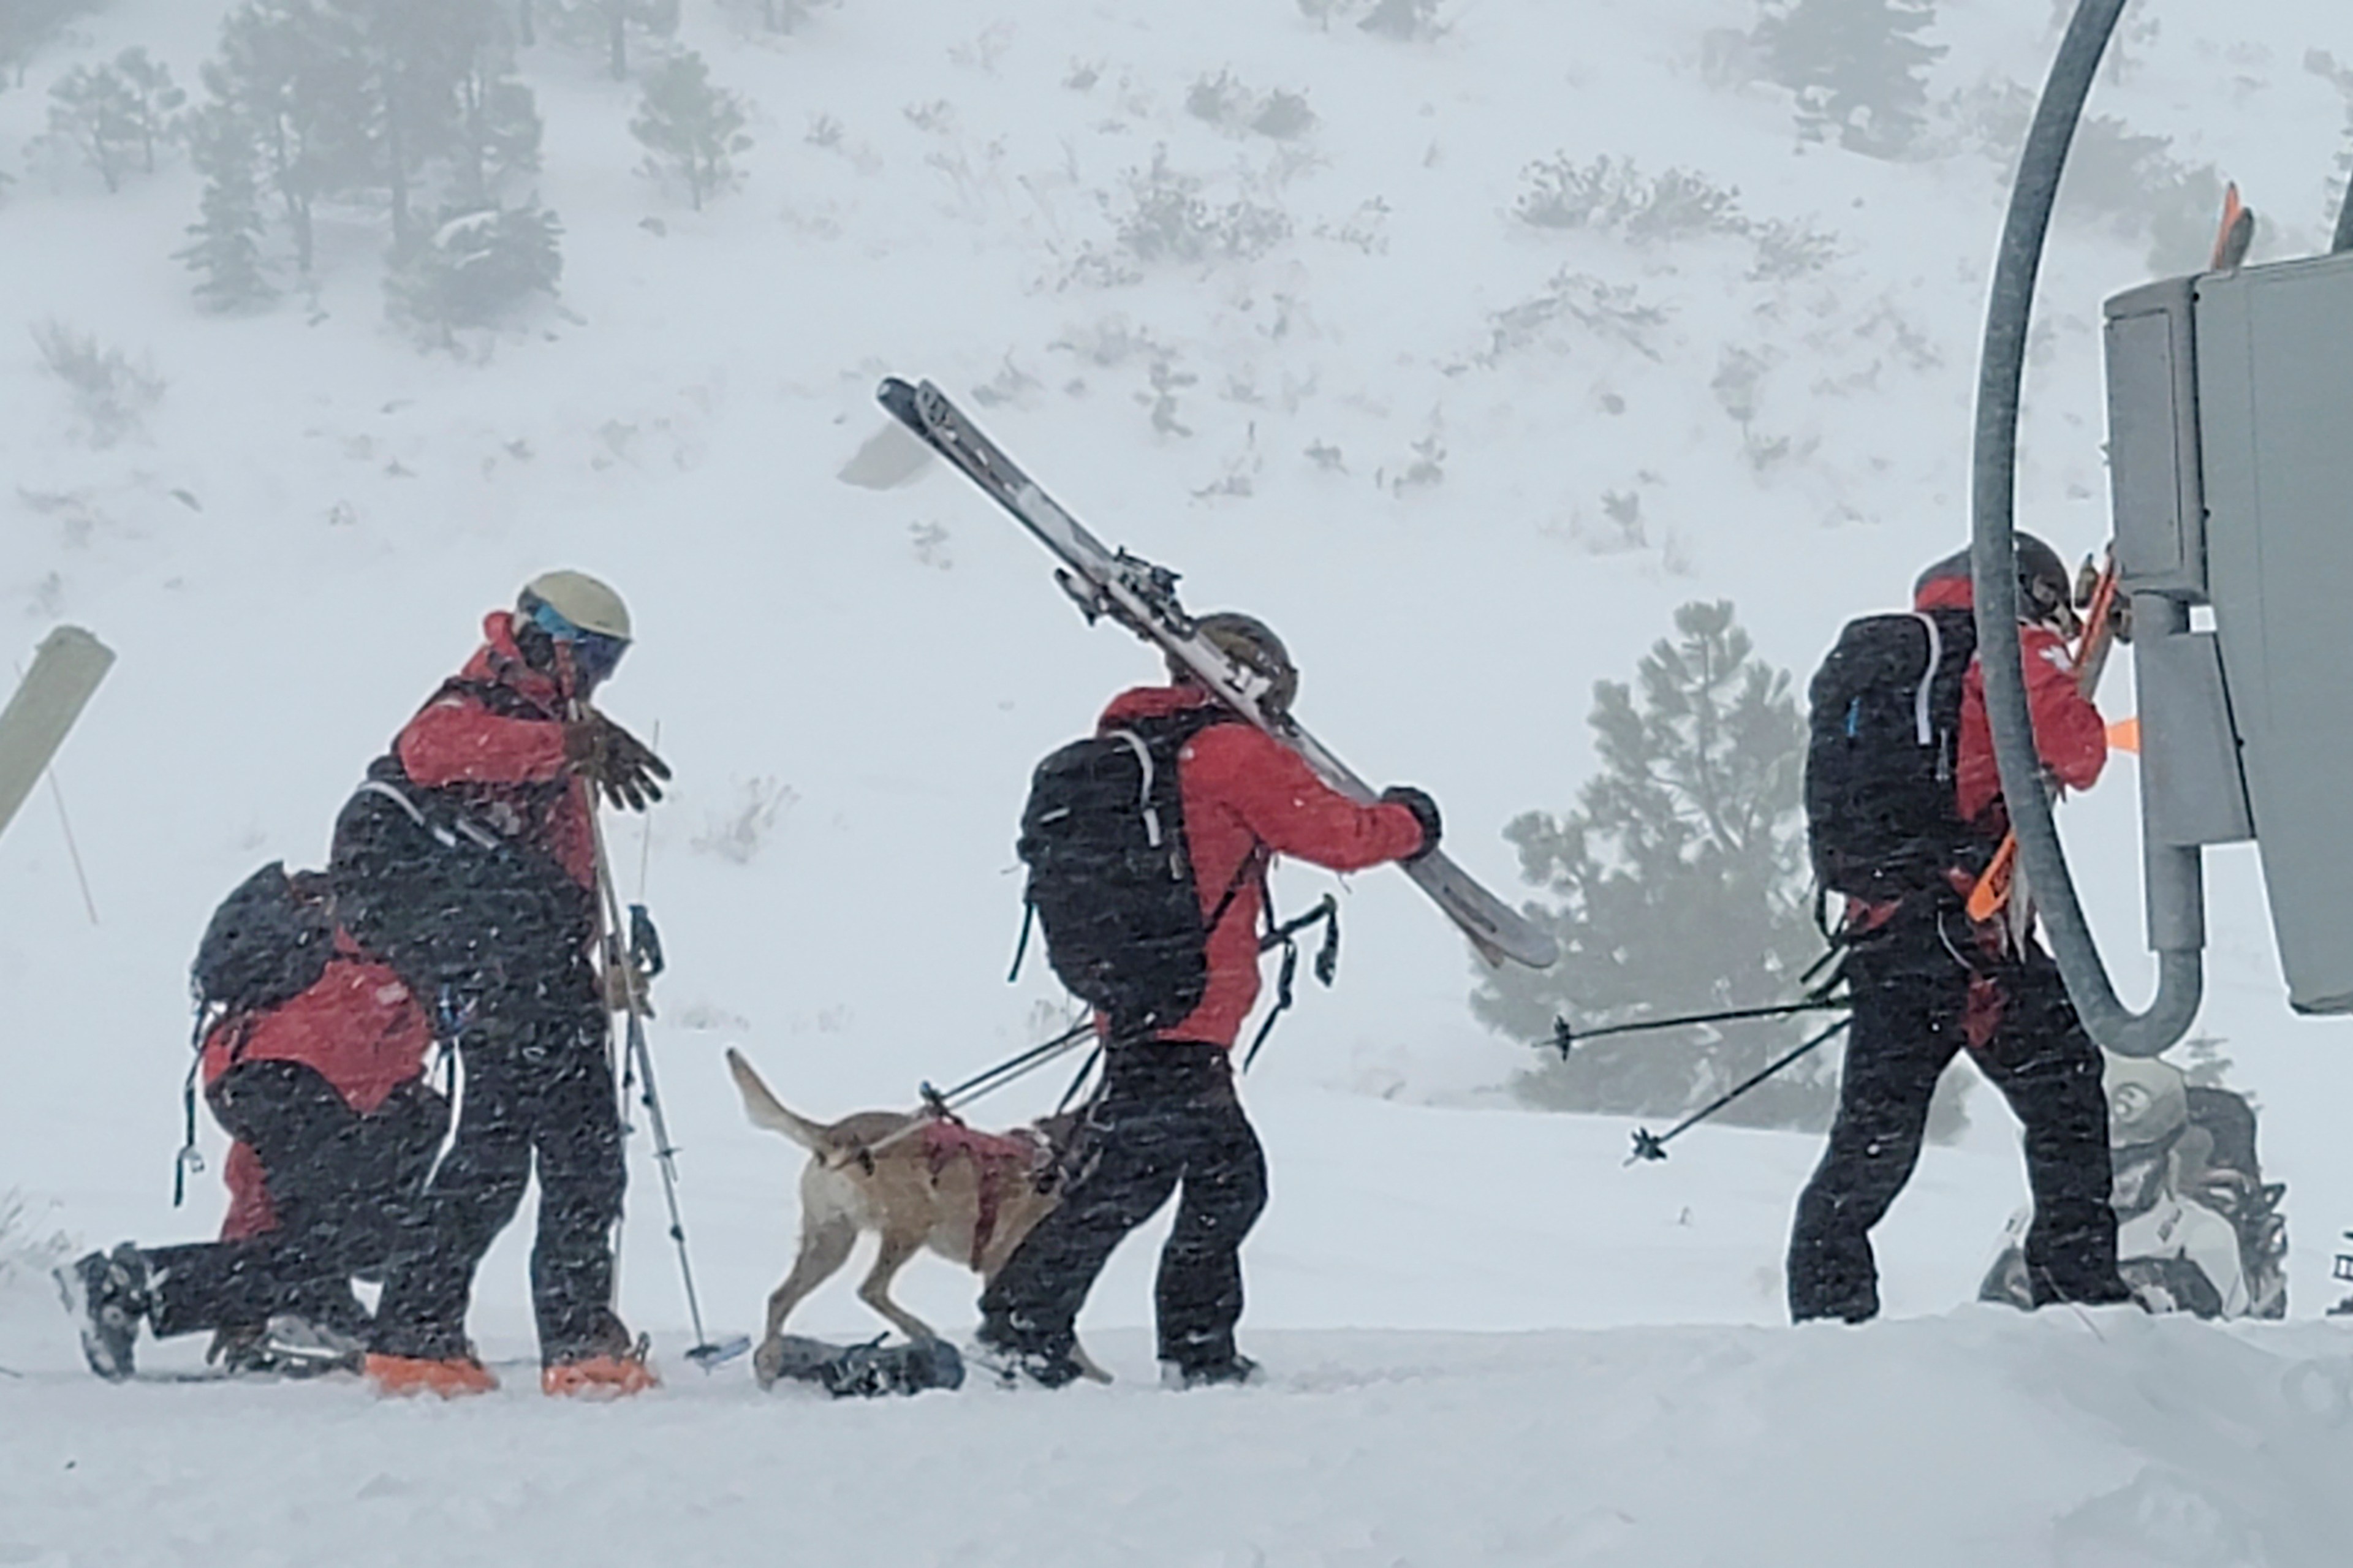 Individuals dressed in red jackets carry ski equipment alongside a dog in the snow